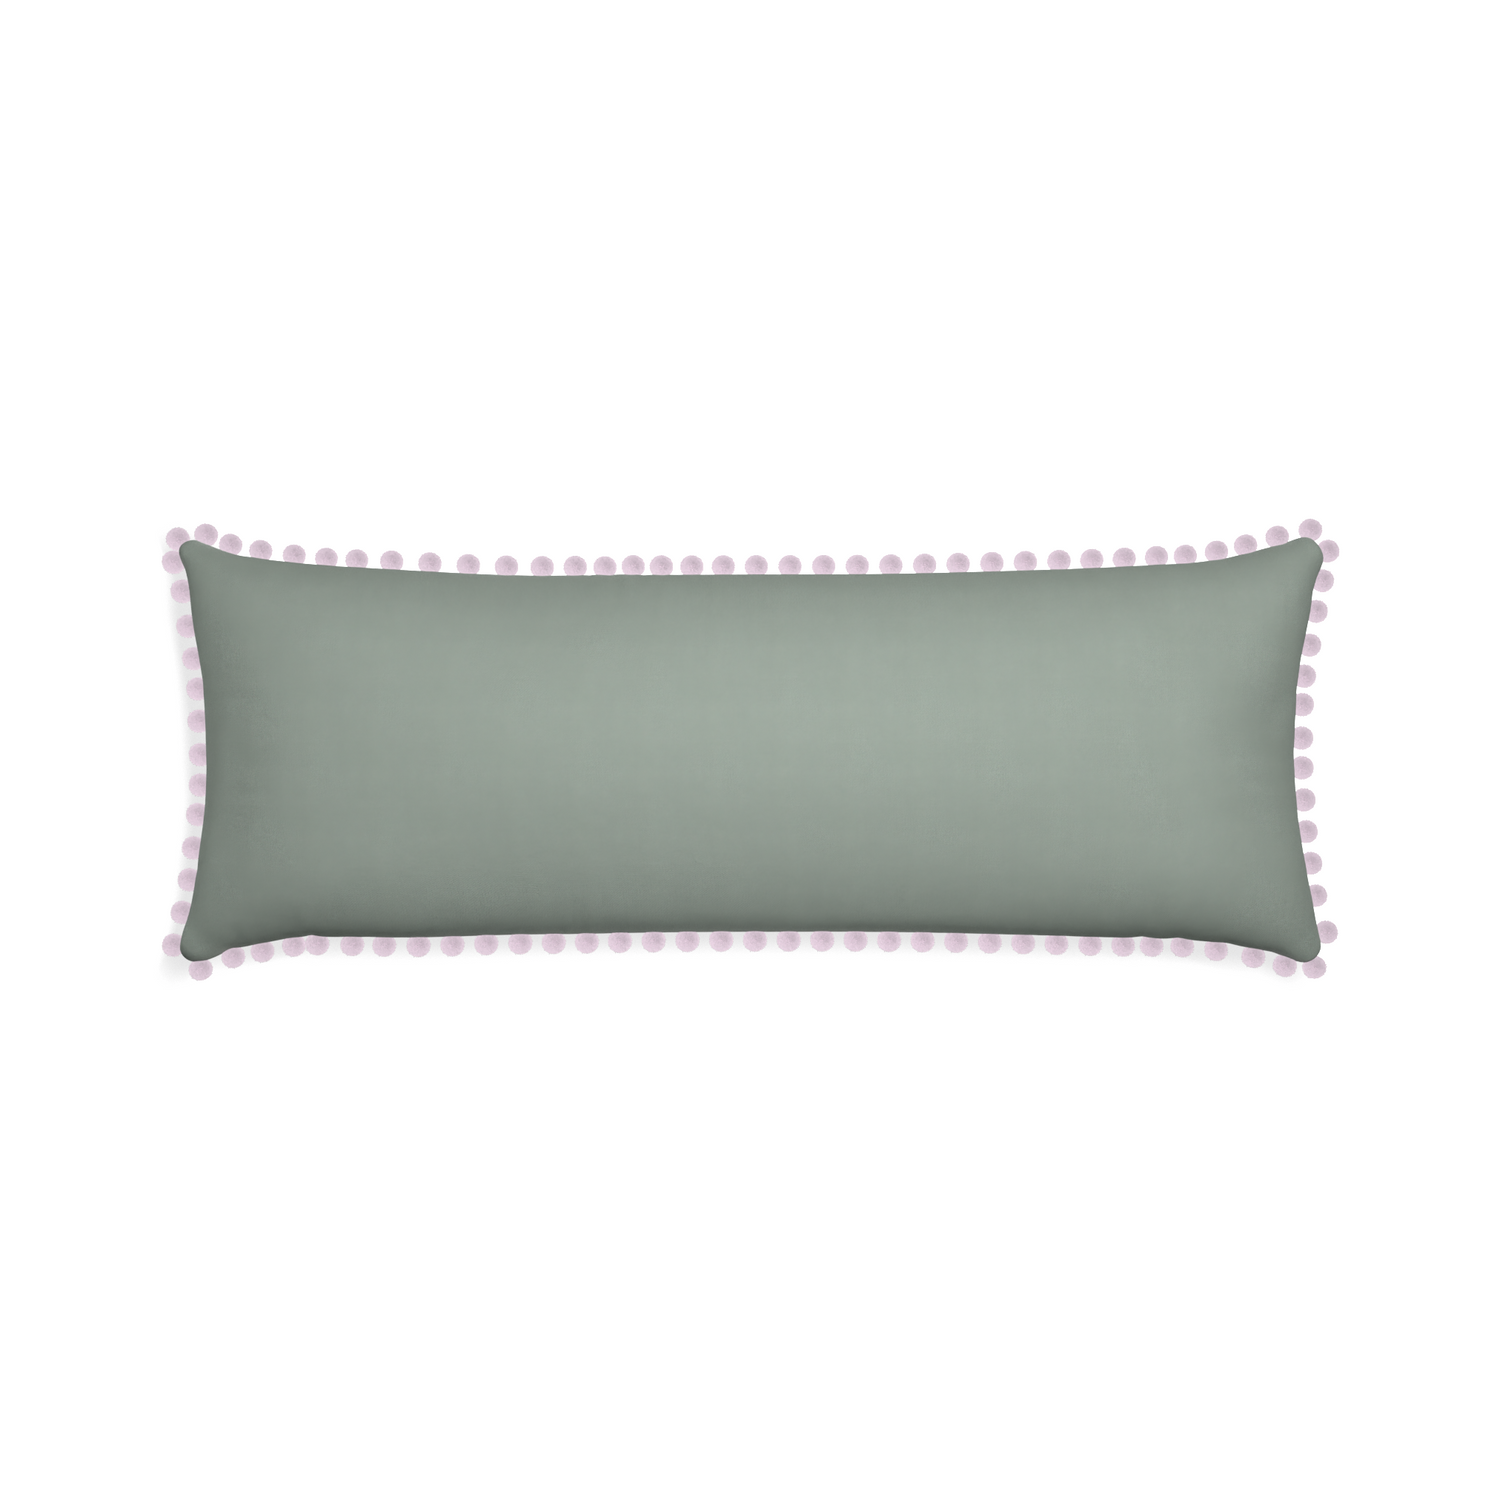 Xl-lumbar sage custom sage green cottonpillow with l on white background